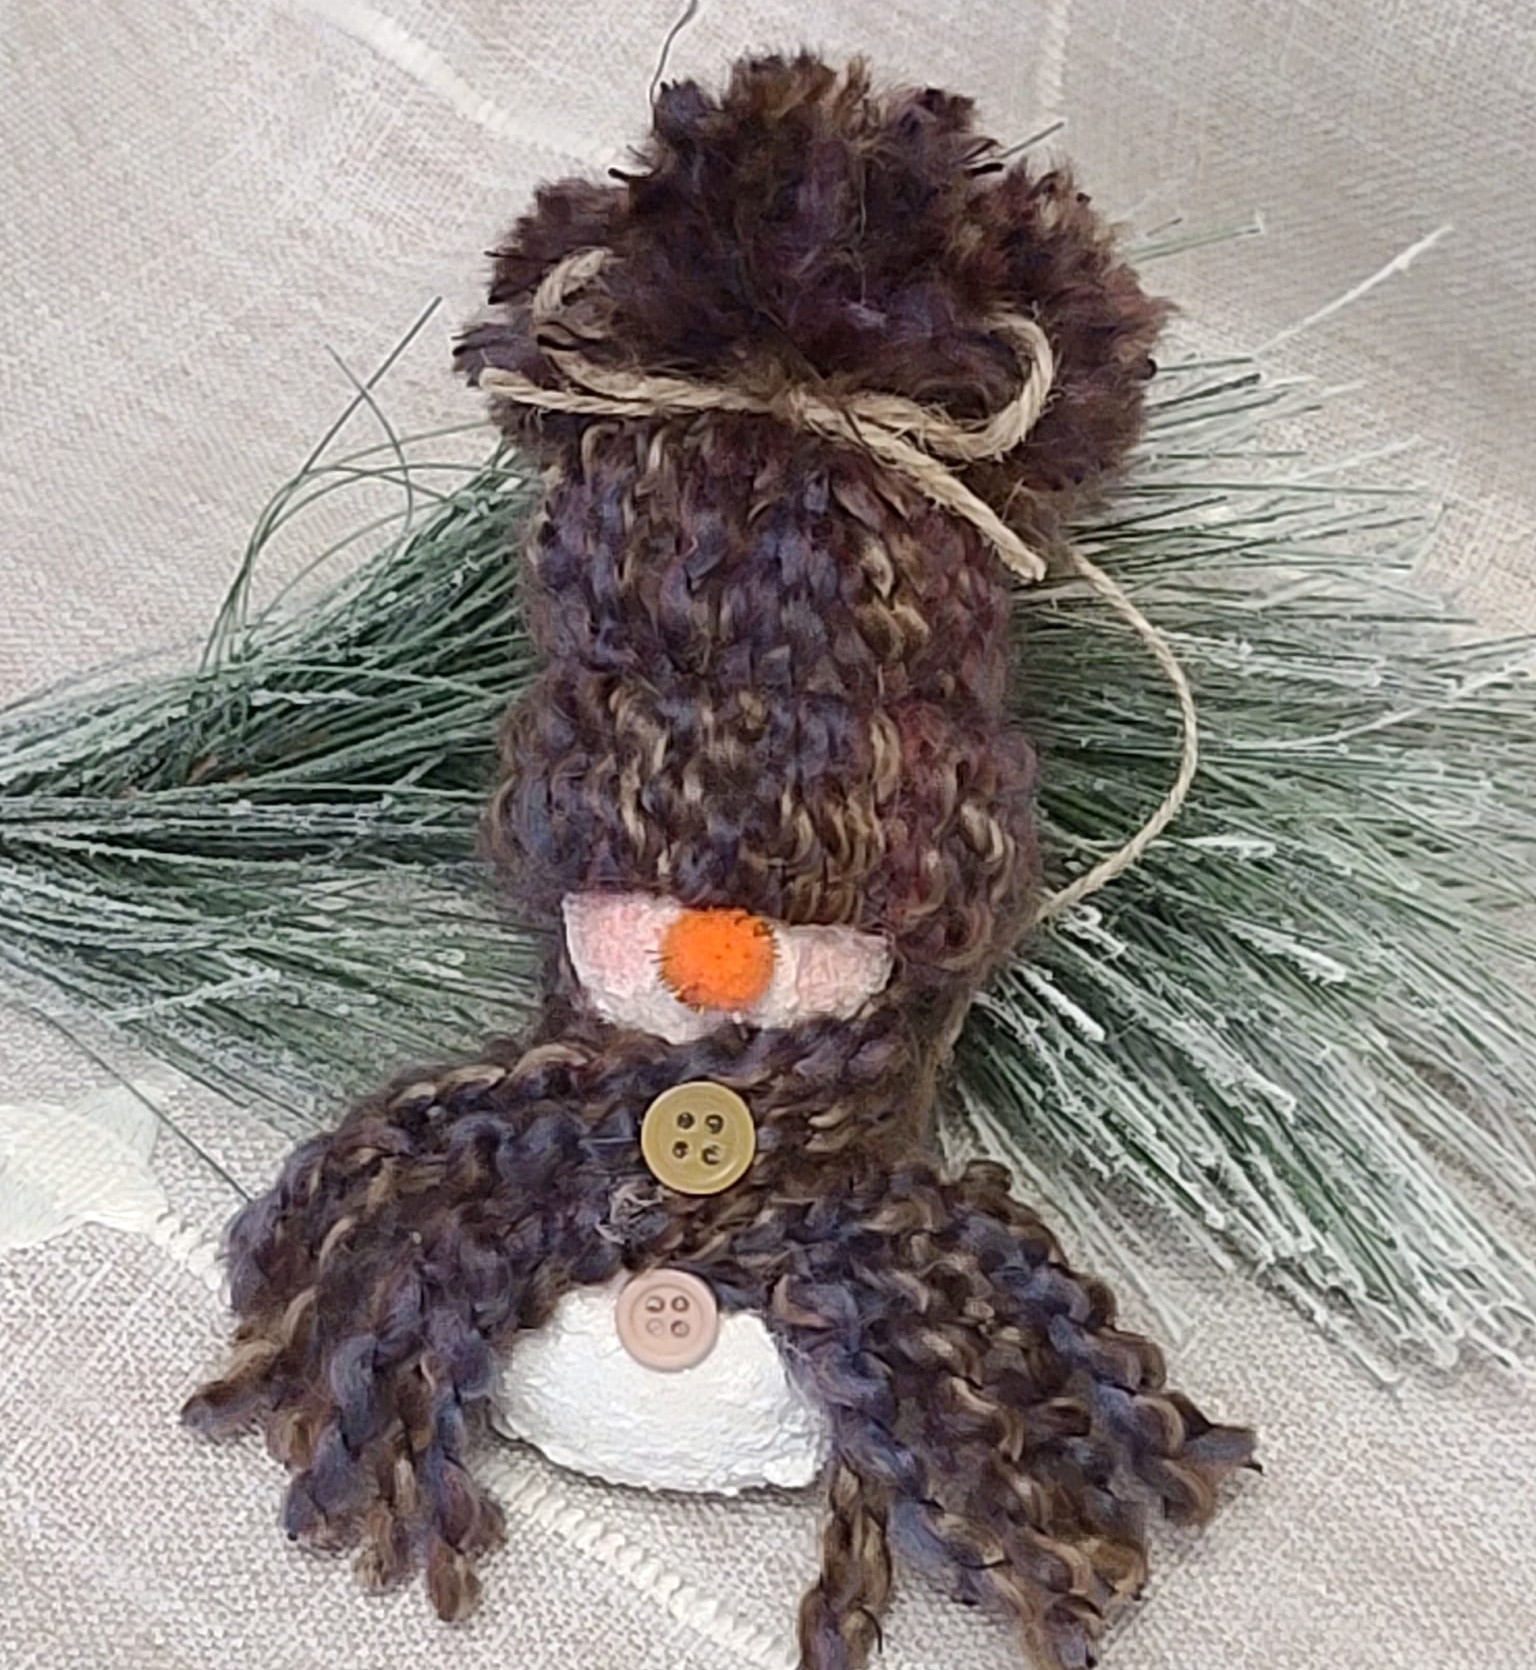 Handpainted gourd snowman ornament with knit hat - multi brown